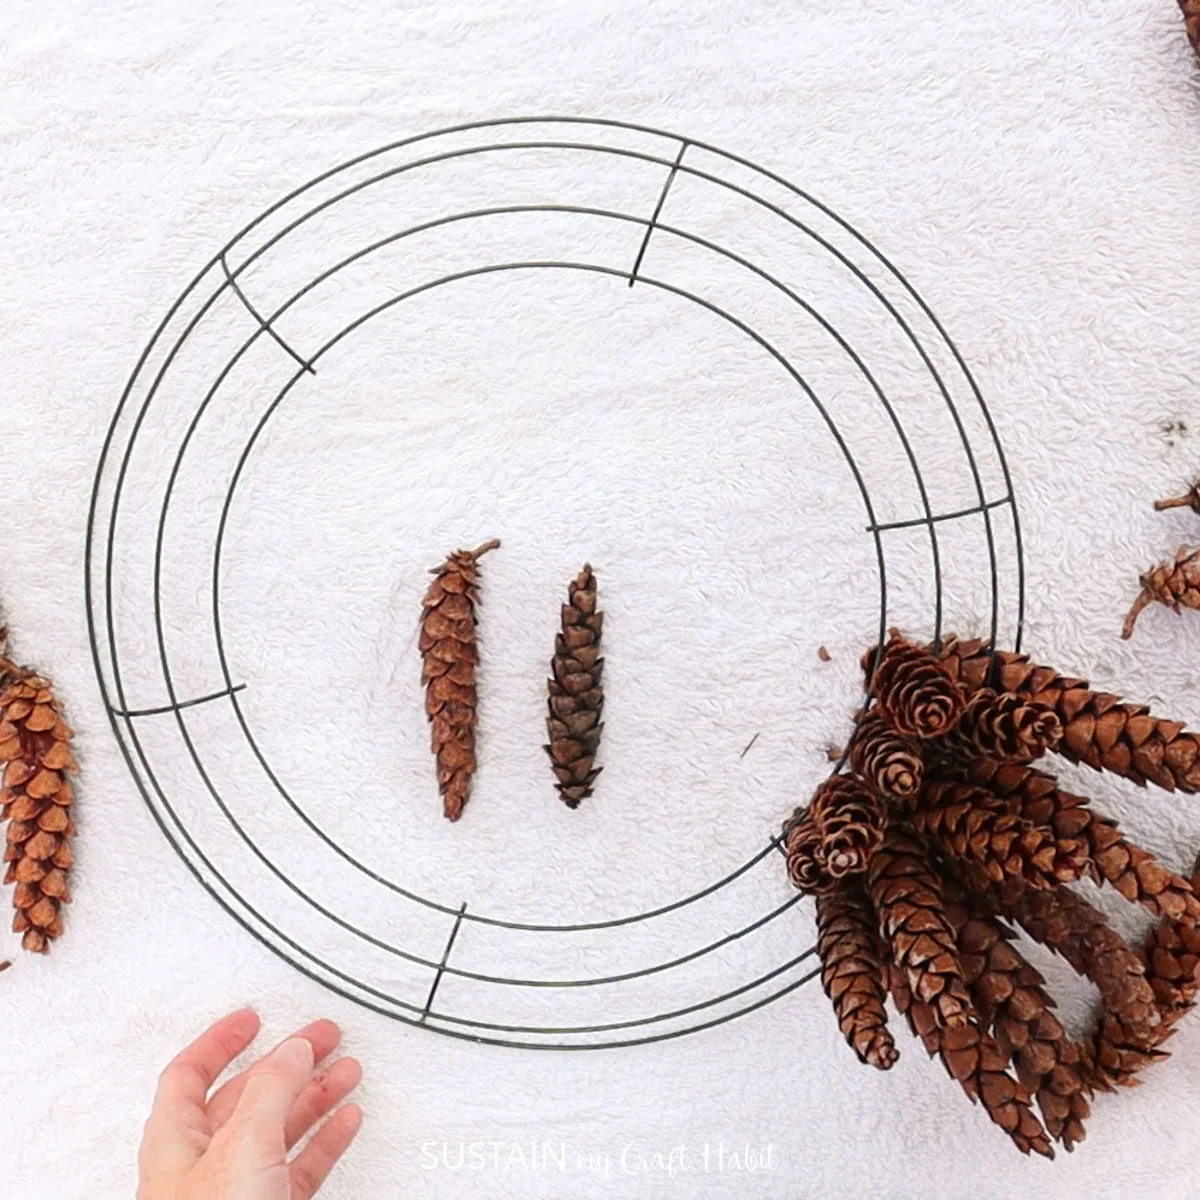 Adding more pinecones into the wreath form.